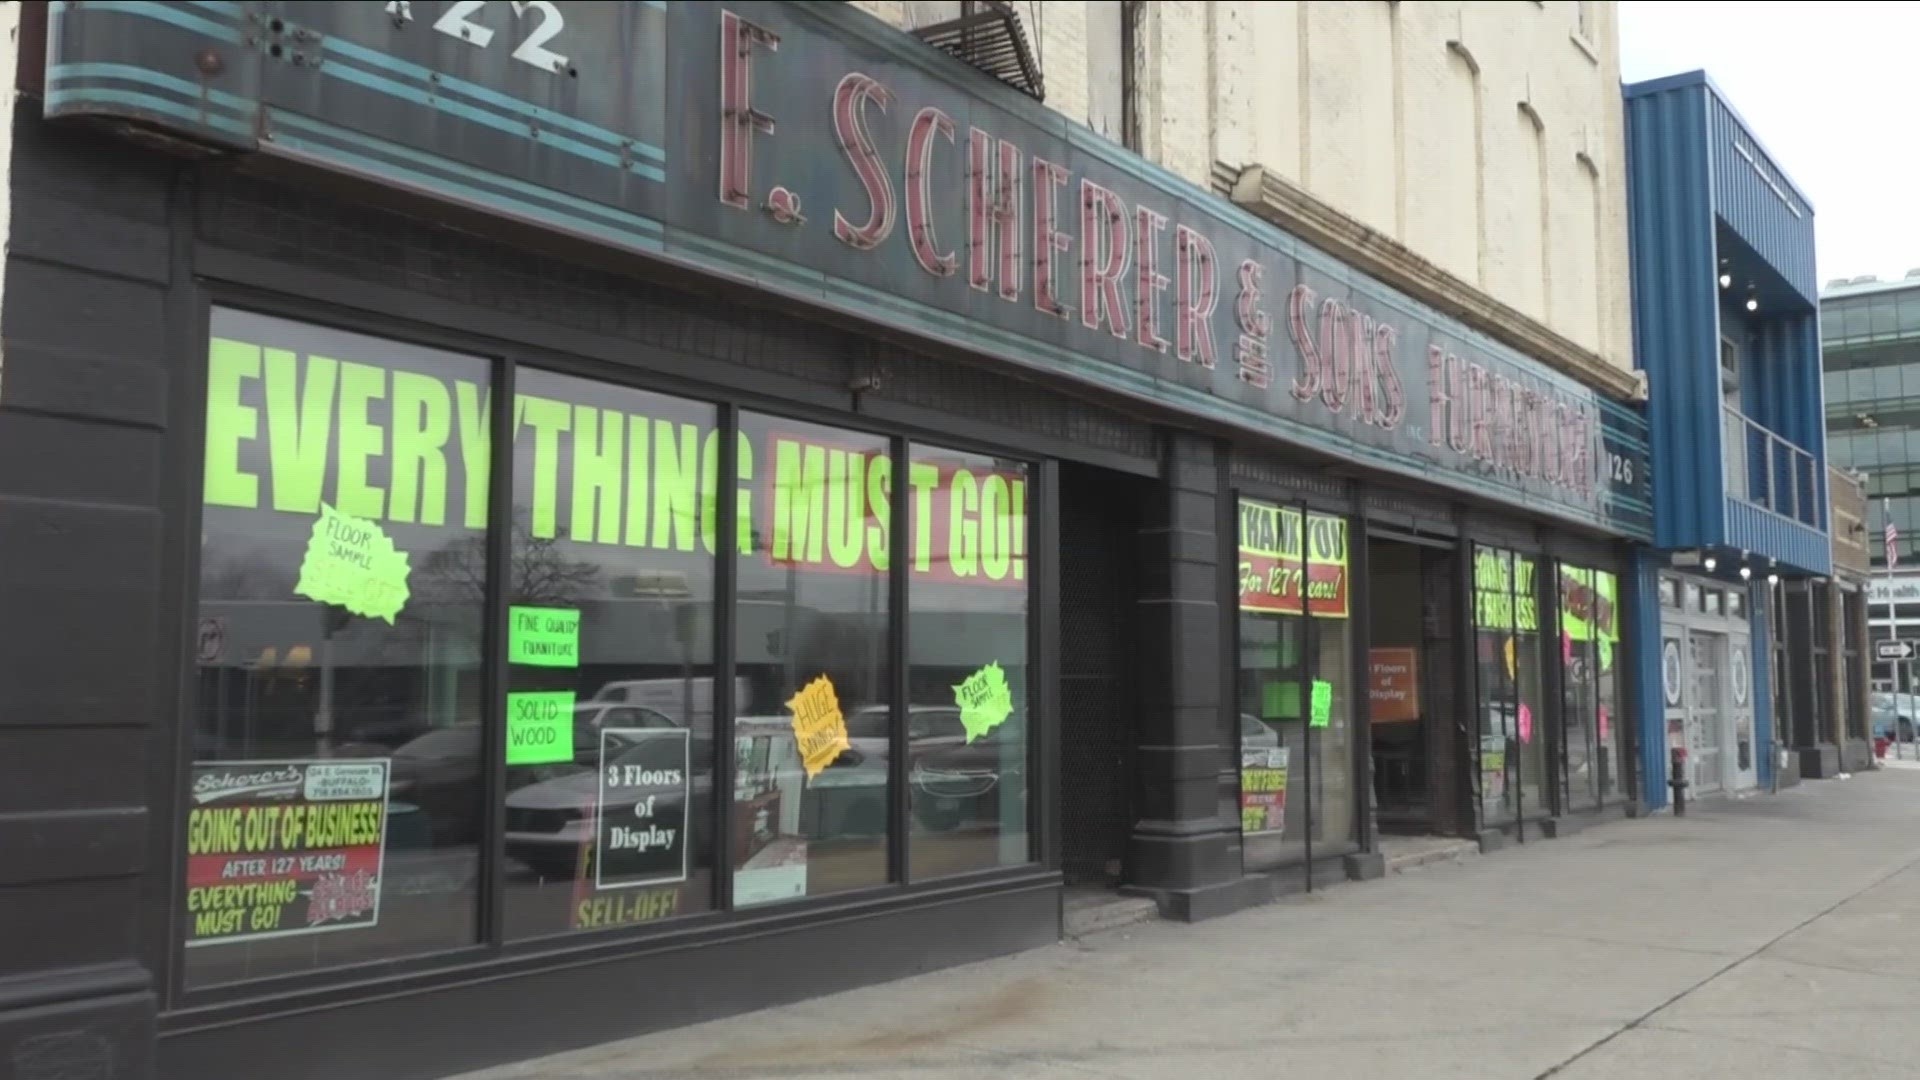 F. Scherer and Sons furniture store on Genesee street closing after 127 years